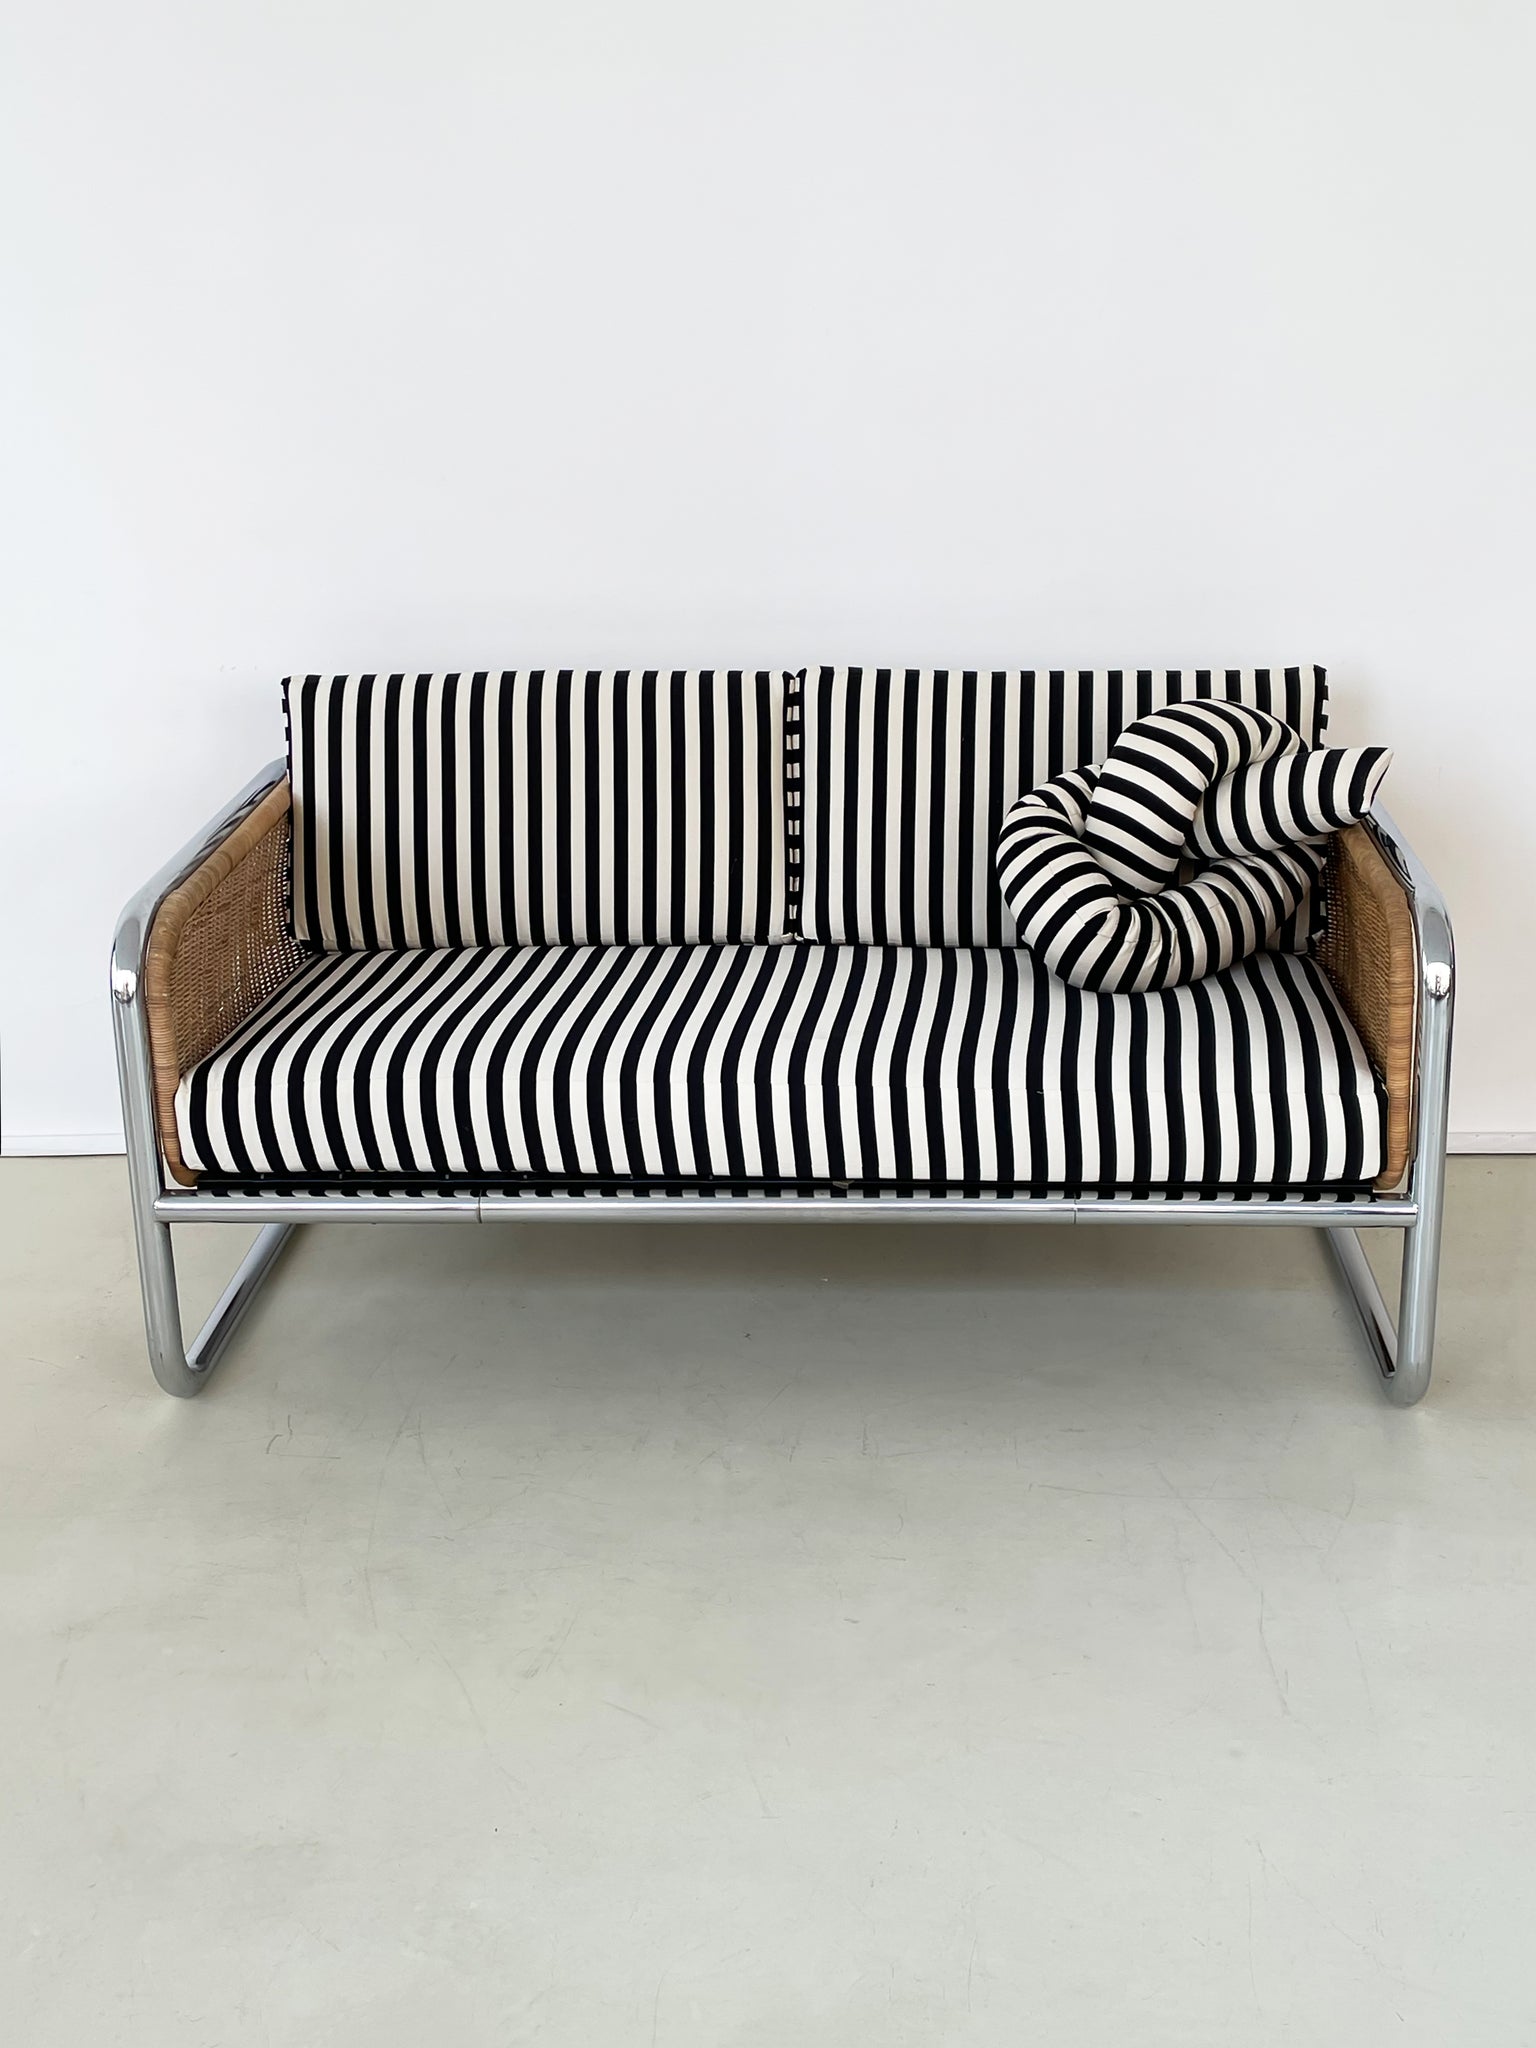 1970s Martin Visser Wicker and Chrome Cantilever Couch